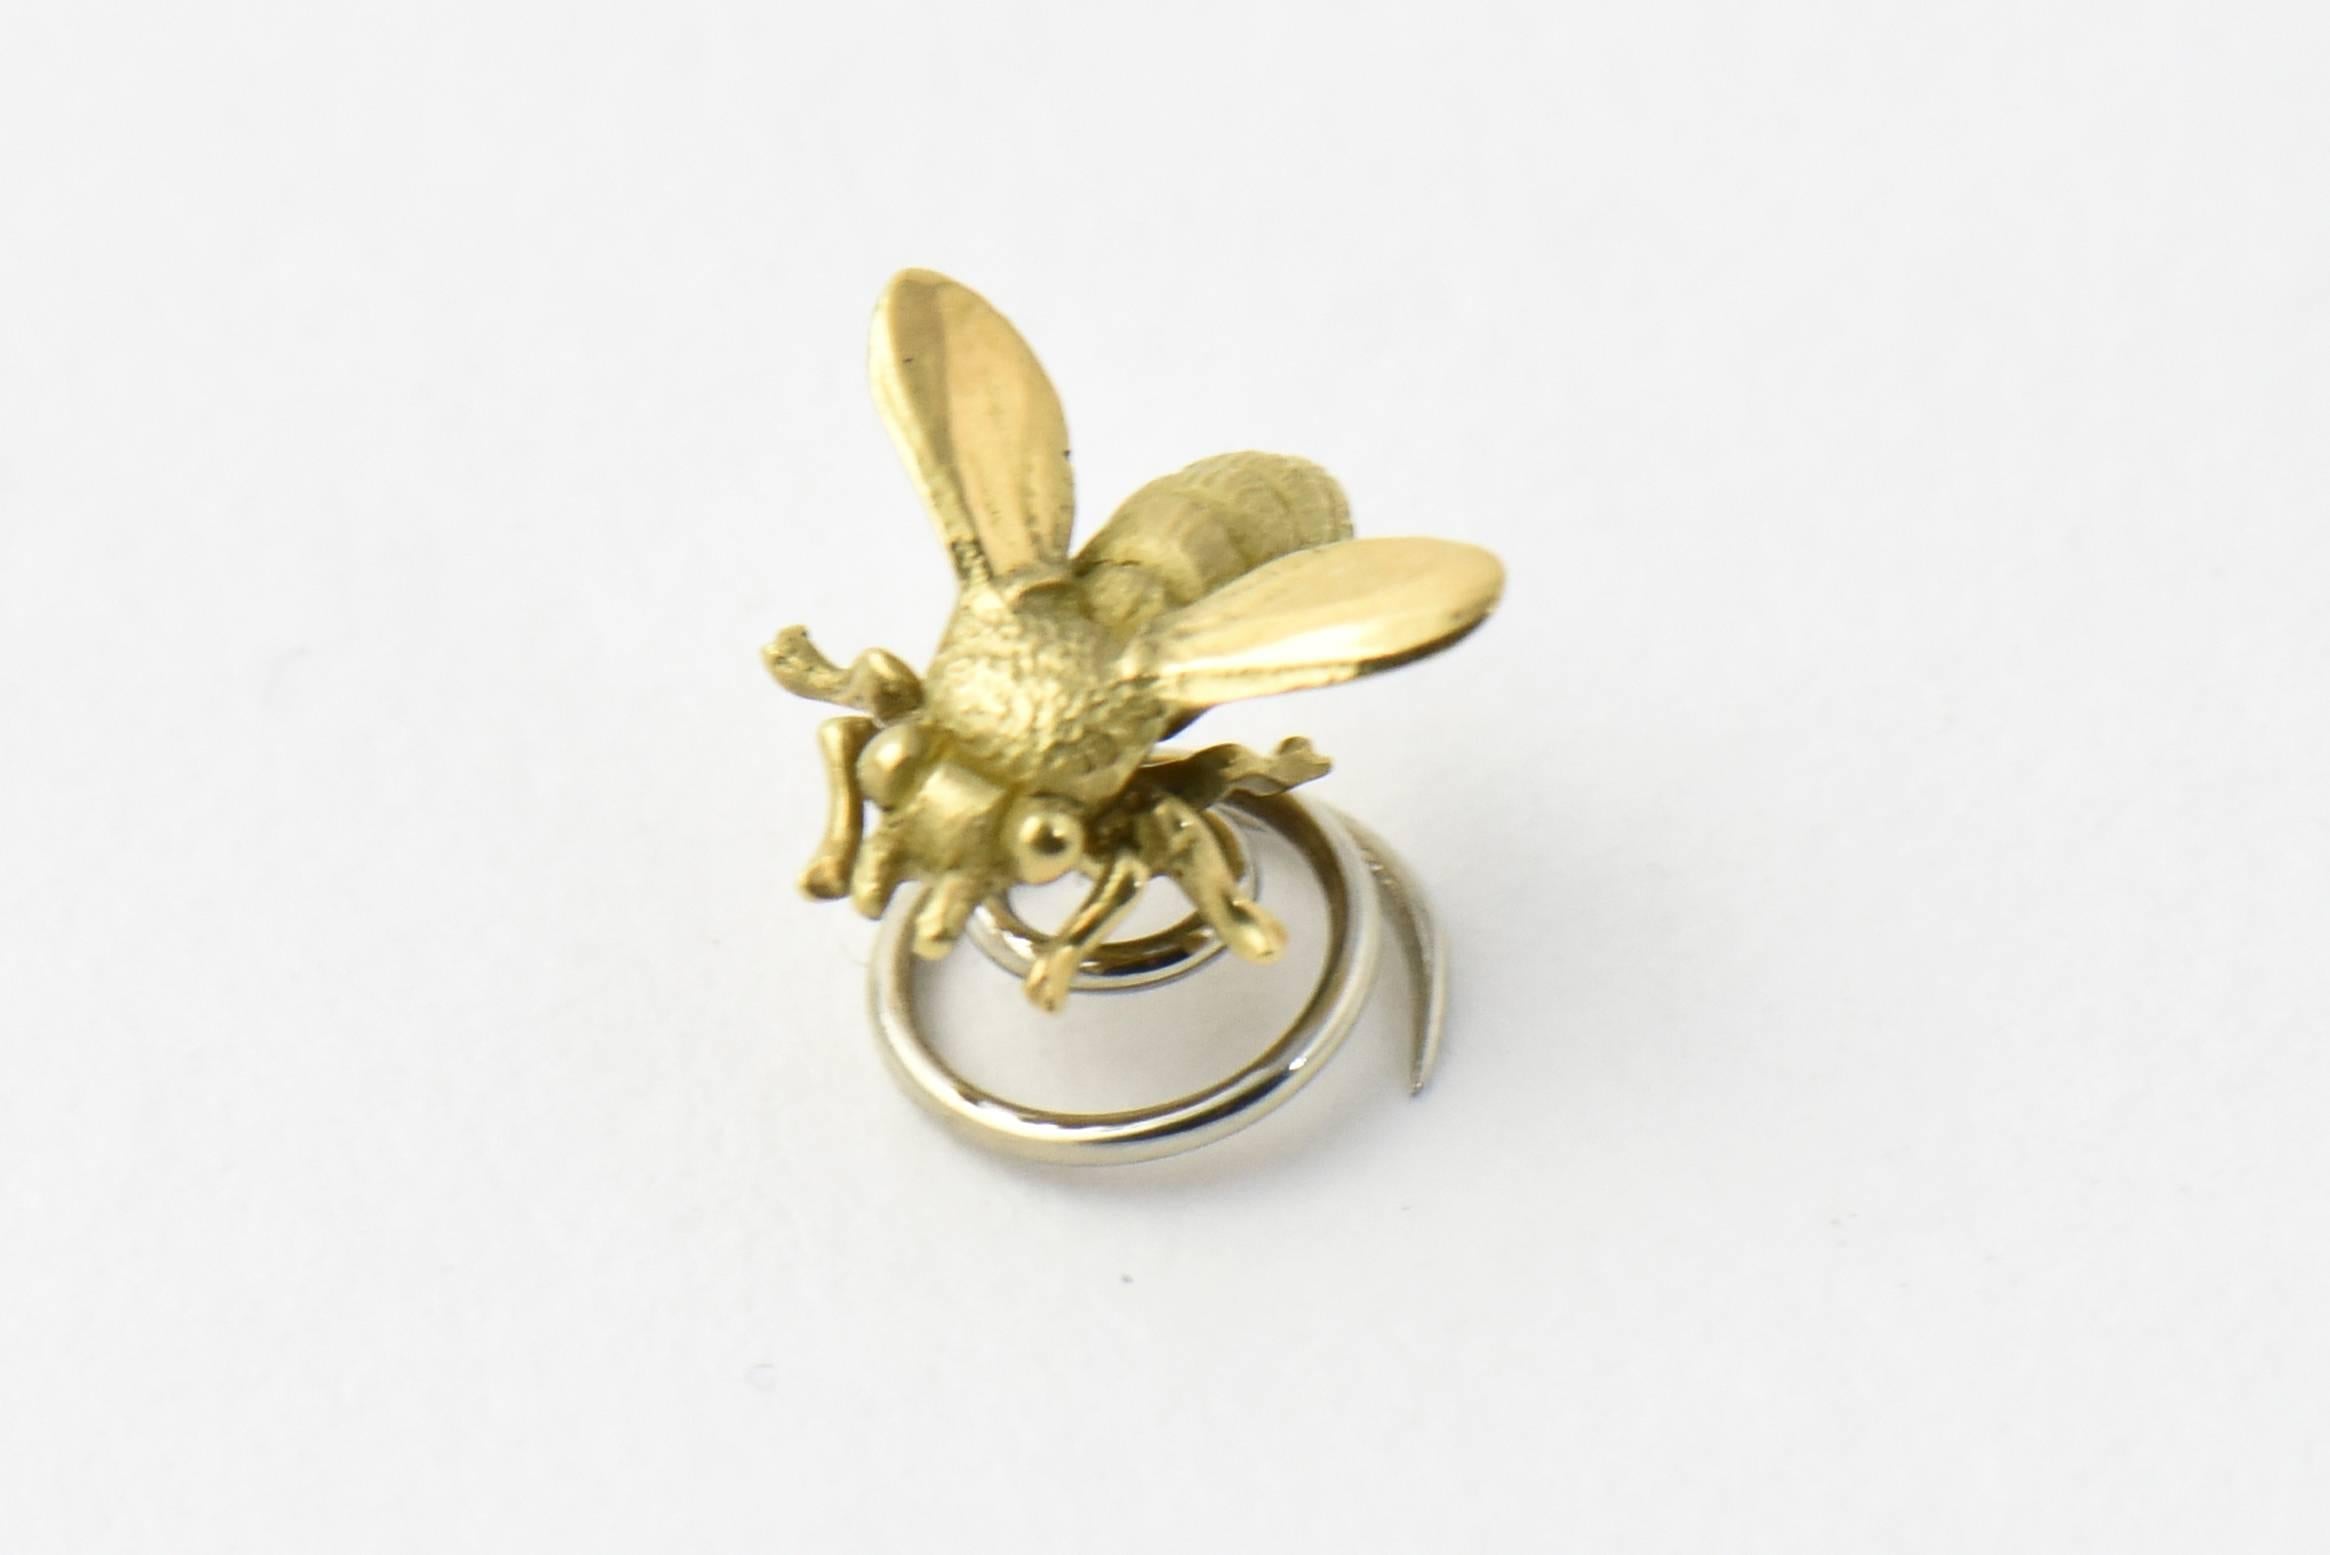 18K yellow gold bee pin with metal corkscrew back that can be used in hair, a lapel, veil, sweater, or hat. Marked "750" for 18K gold.
